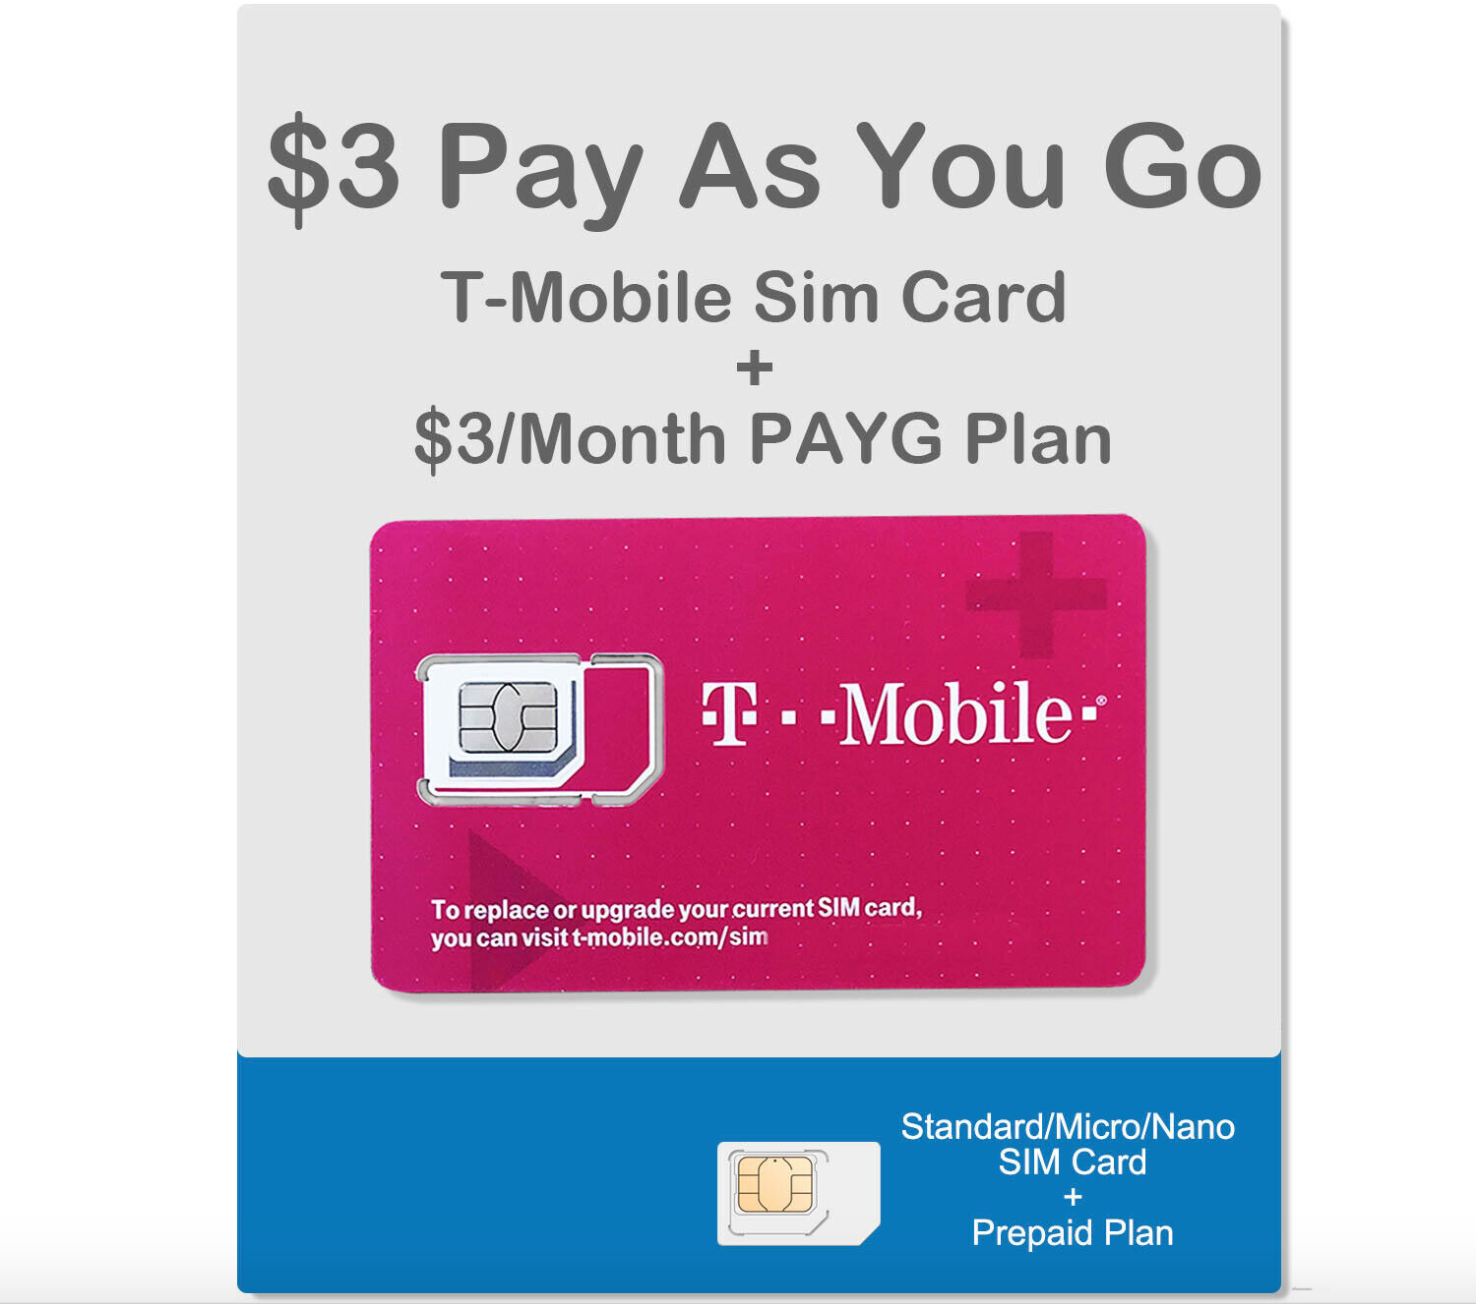 T-Mobile Prepaid Pay As You Go Deluxe $3 Card and Brand new Sim Month $0.1 p Plan